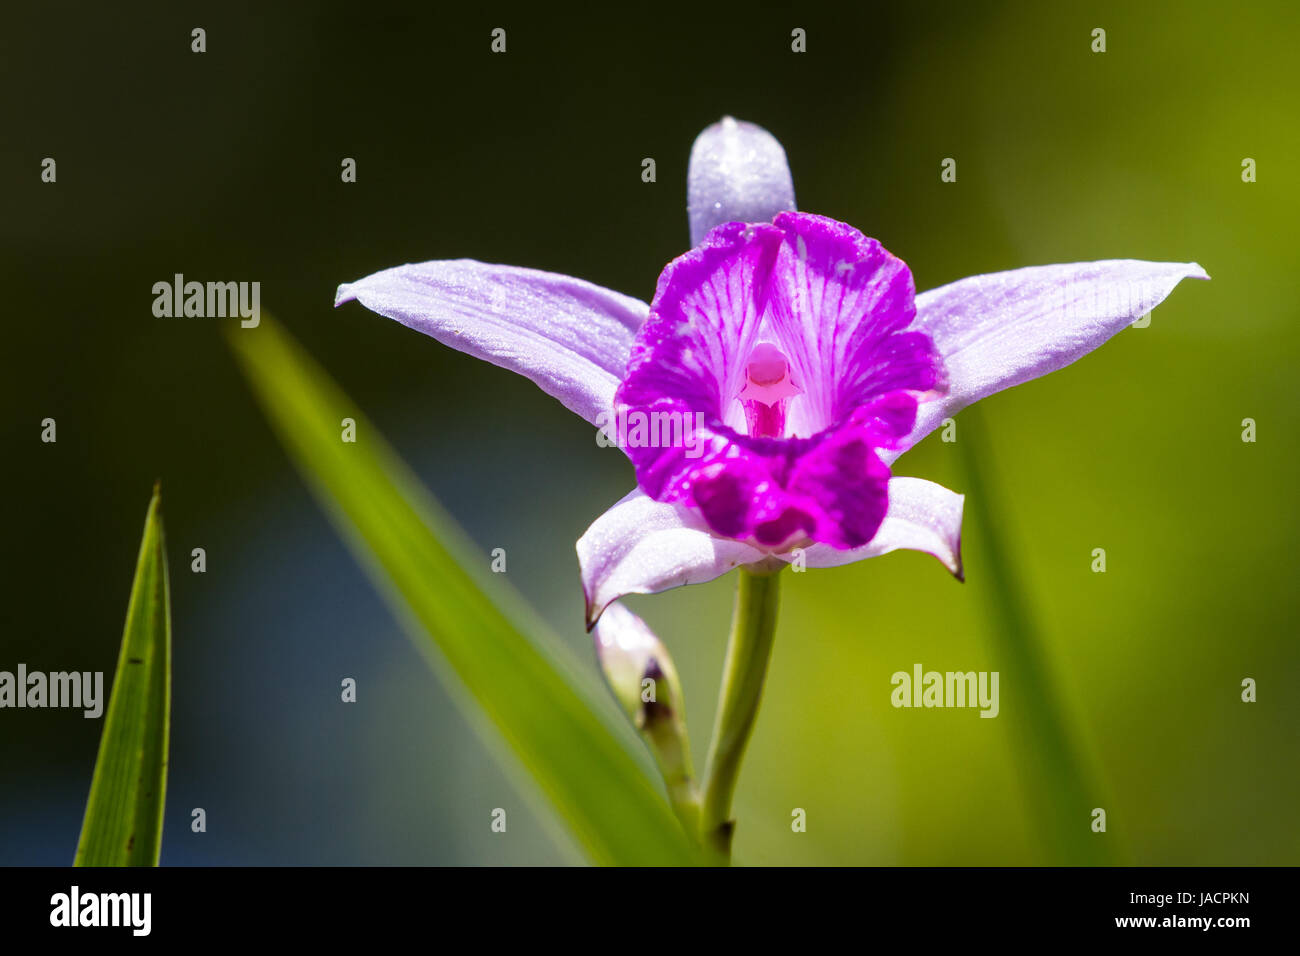 close up of a beautiful bamboo orchid with soft purple petals with a natural green background Stock Photo